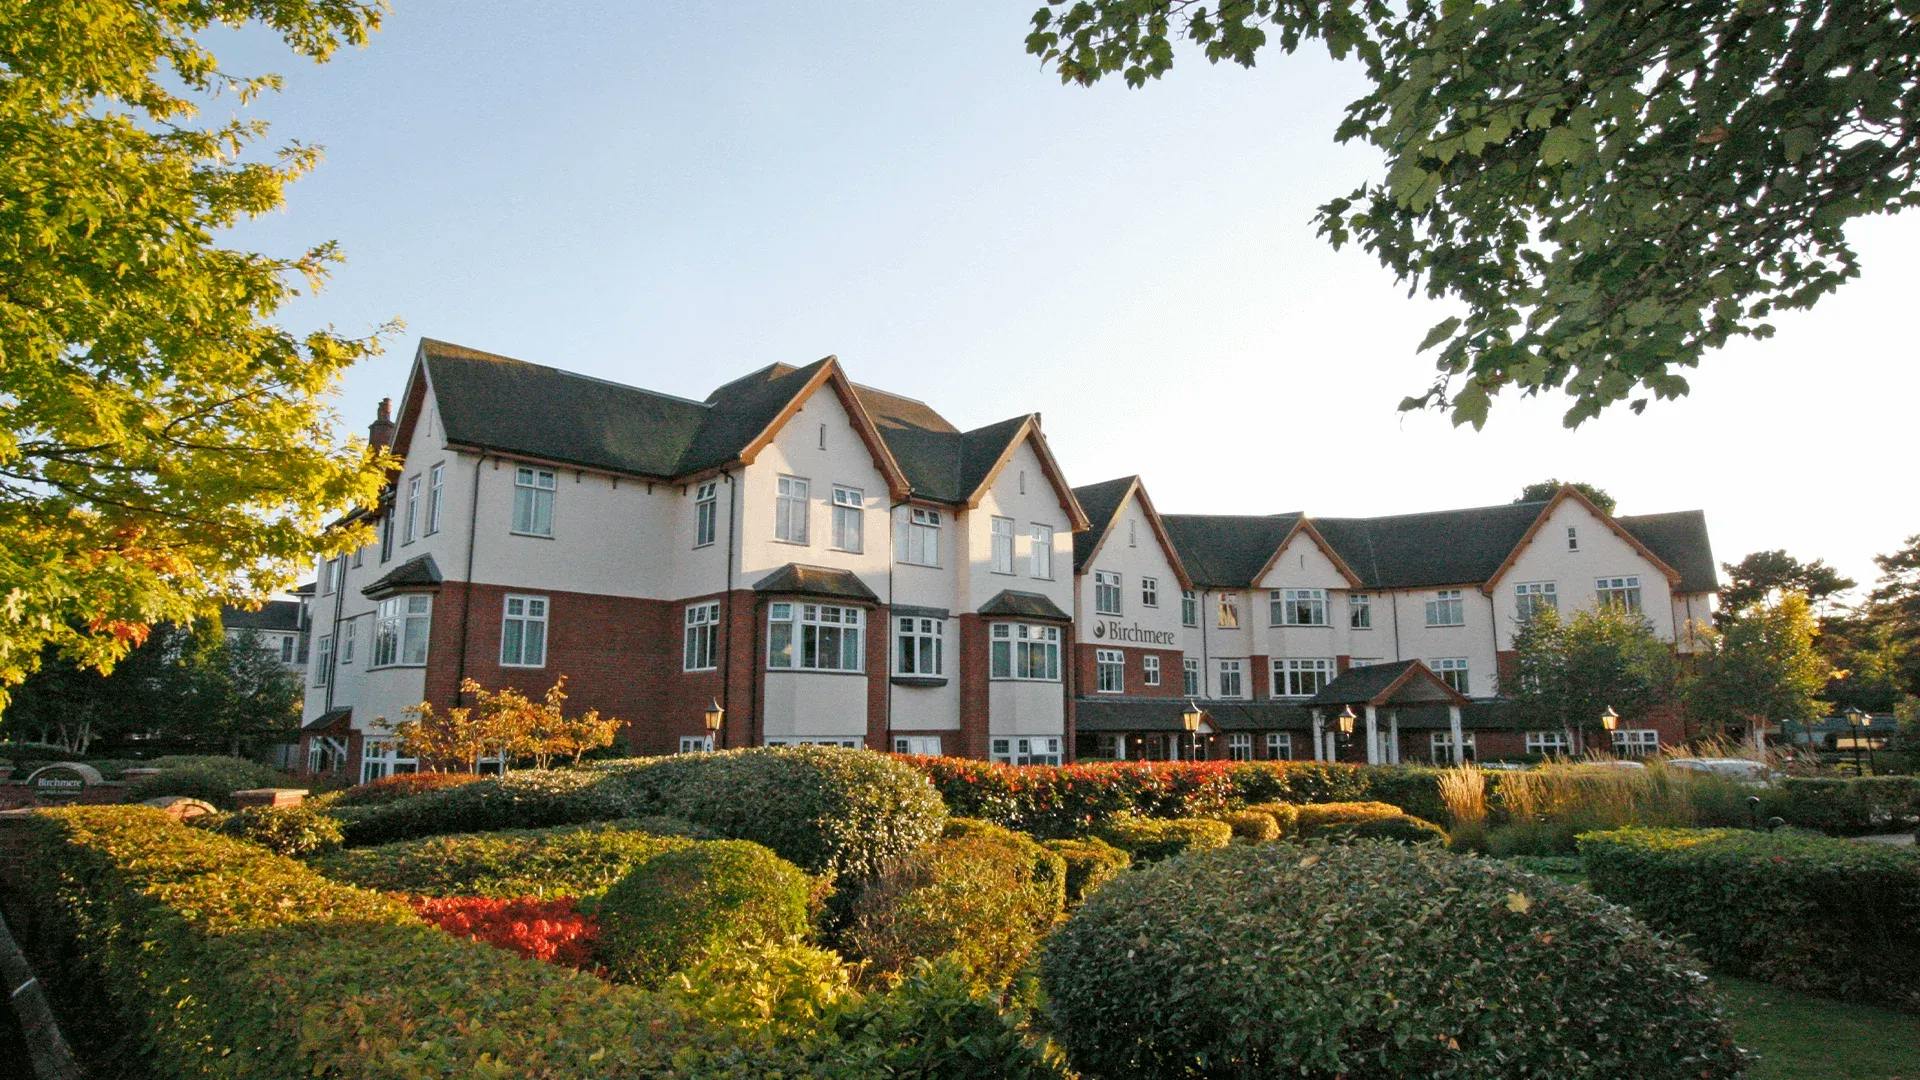 Birchmere House care home